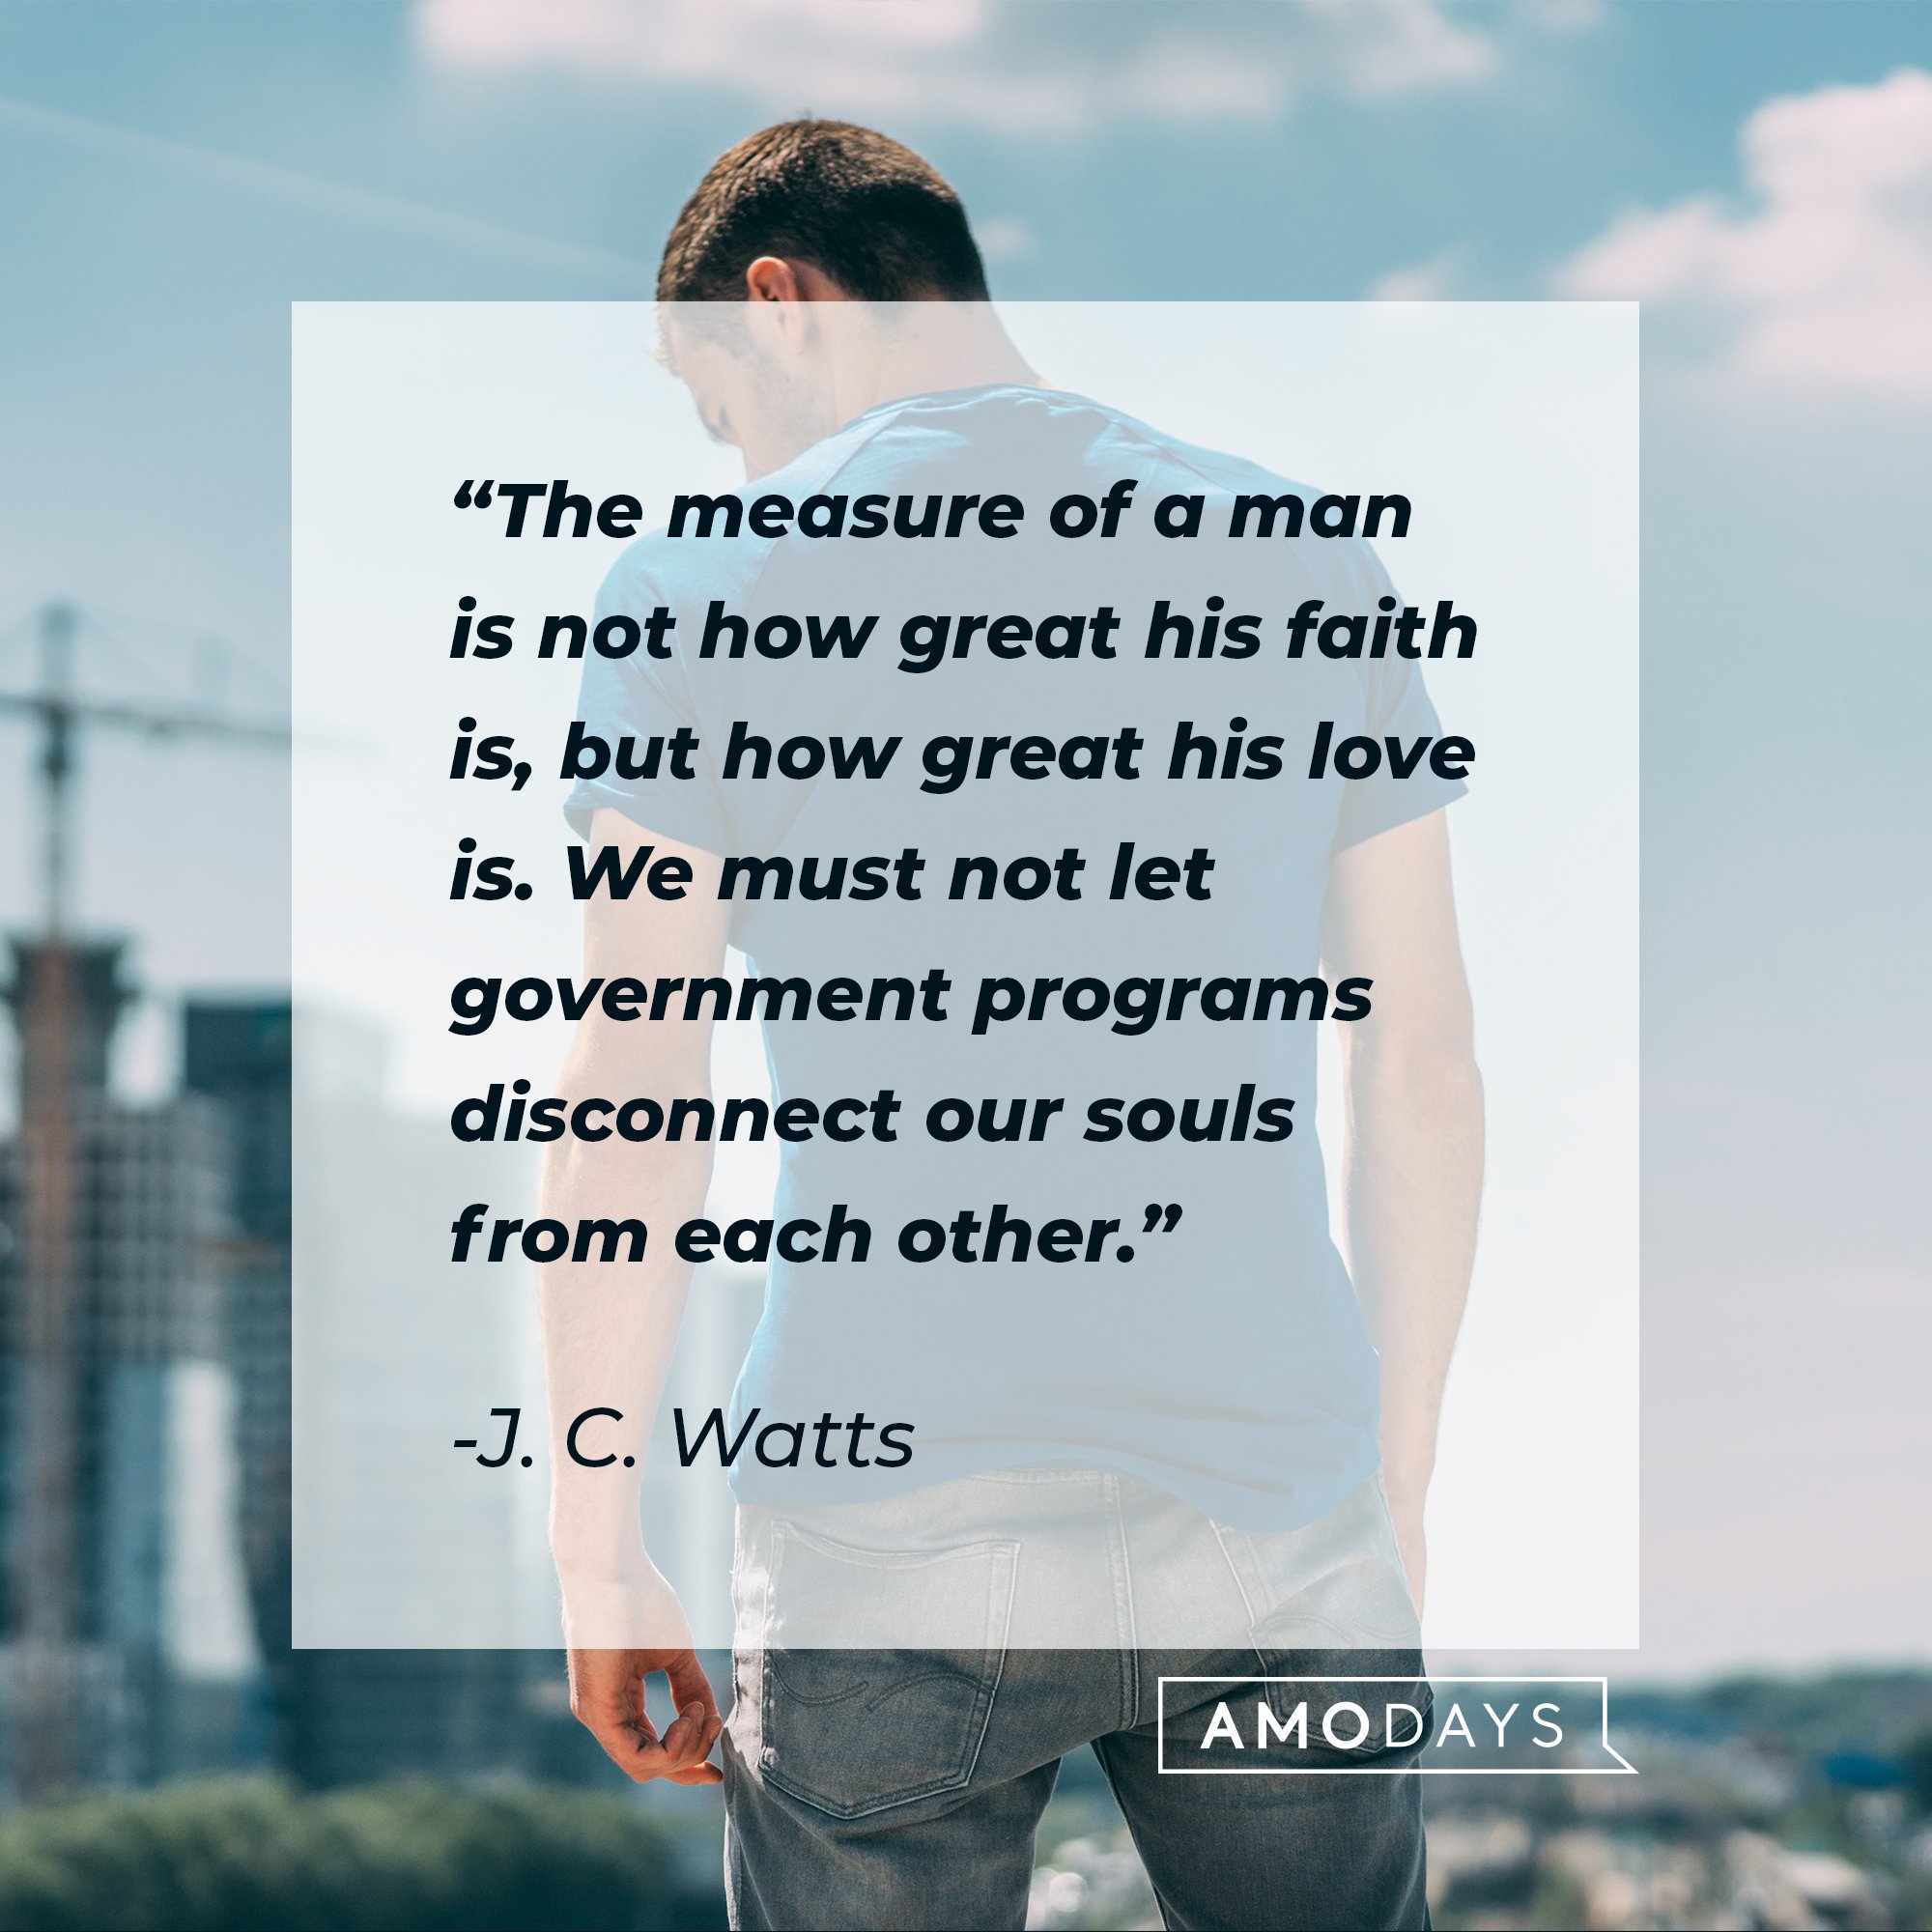 J. C. Watts’ quote: "The measure of a man is not how great his faith is, but how great his love is. We must not let government programs disconnect our souls from each other."  | Image: AmoDays